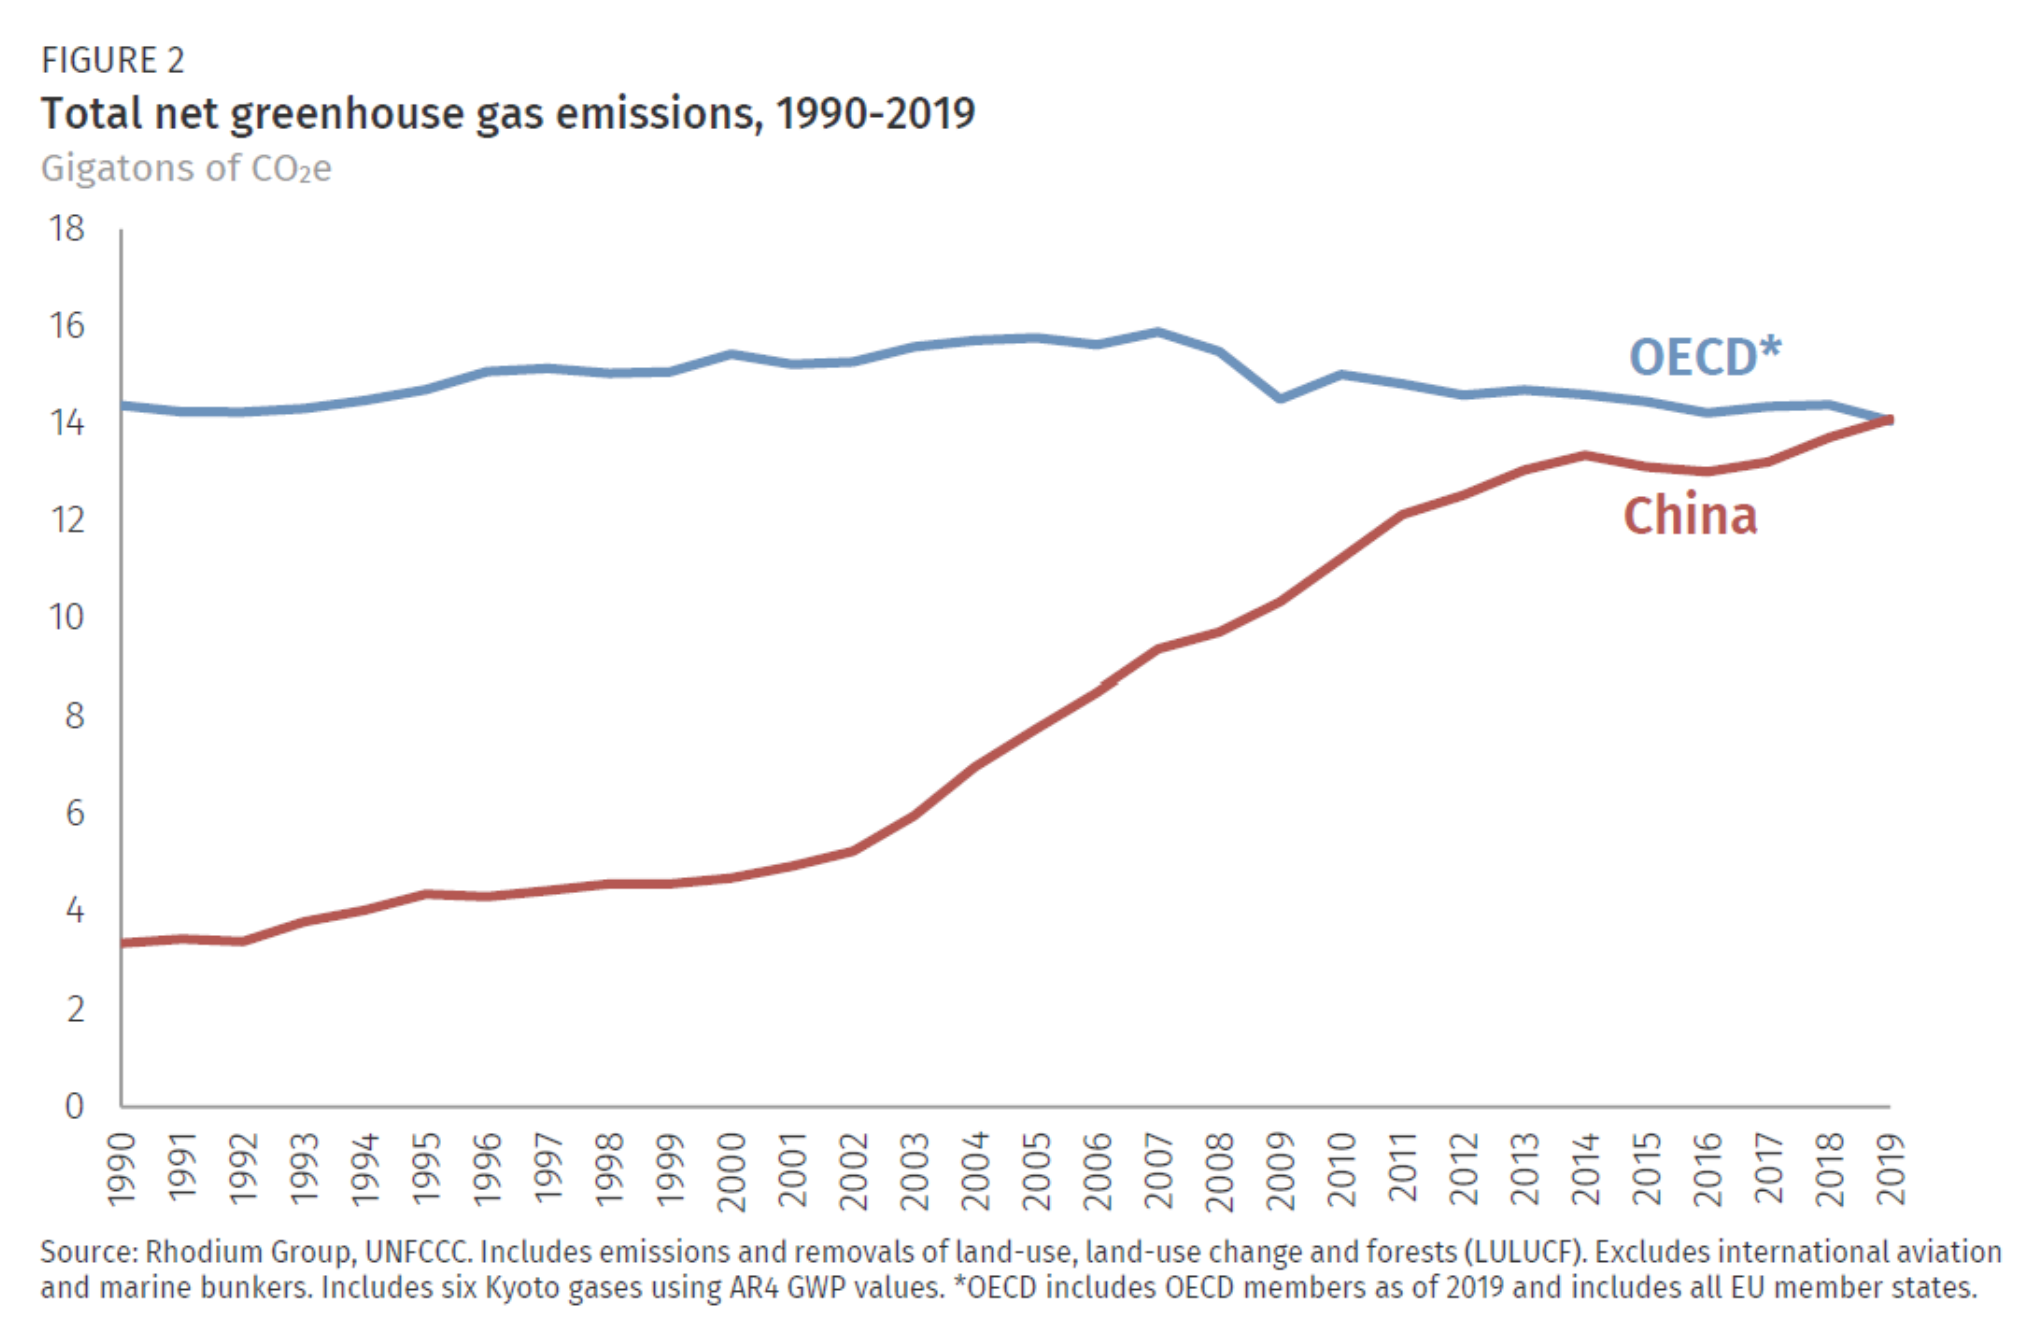 Total greenhouse gas emissions from China and OECD nations, 1990-2019. In 2019, China’s GHG emissions passed the 14 gigaton threshold for the first time, reaching 14,093 million metric tons of CO2 equivalent (MMt CO2e). This represents a more than tripling of 1990 levels, and a 25 percent increase over the past decade. As a result, China’s share of the 2019 global emissions total of 52 gigatons rose to 27 percent. Data: Rhodium Group / UNFCCC. Graphic: Rhodium Group